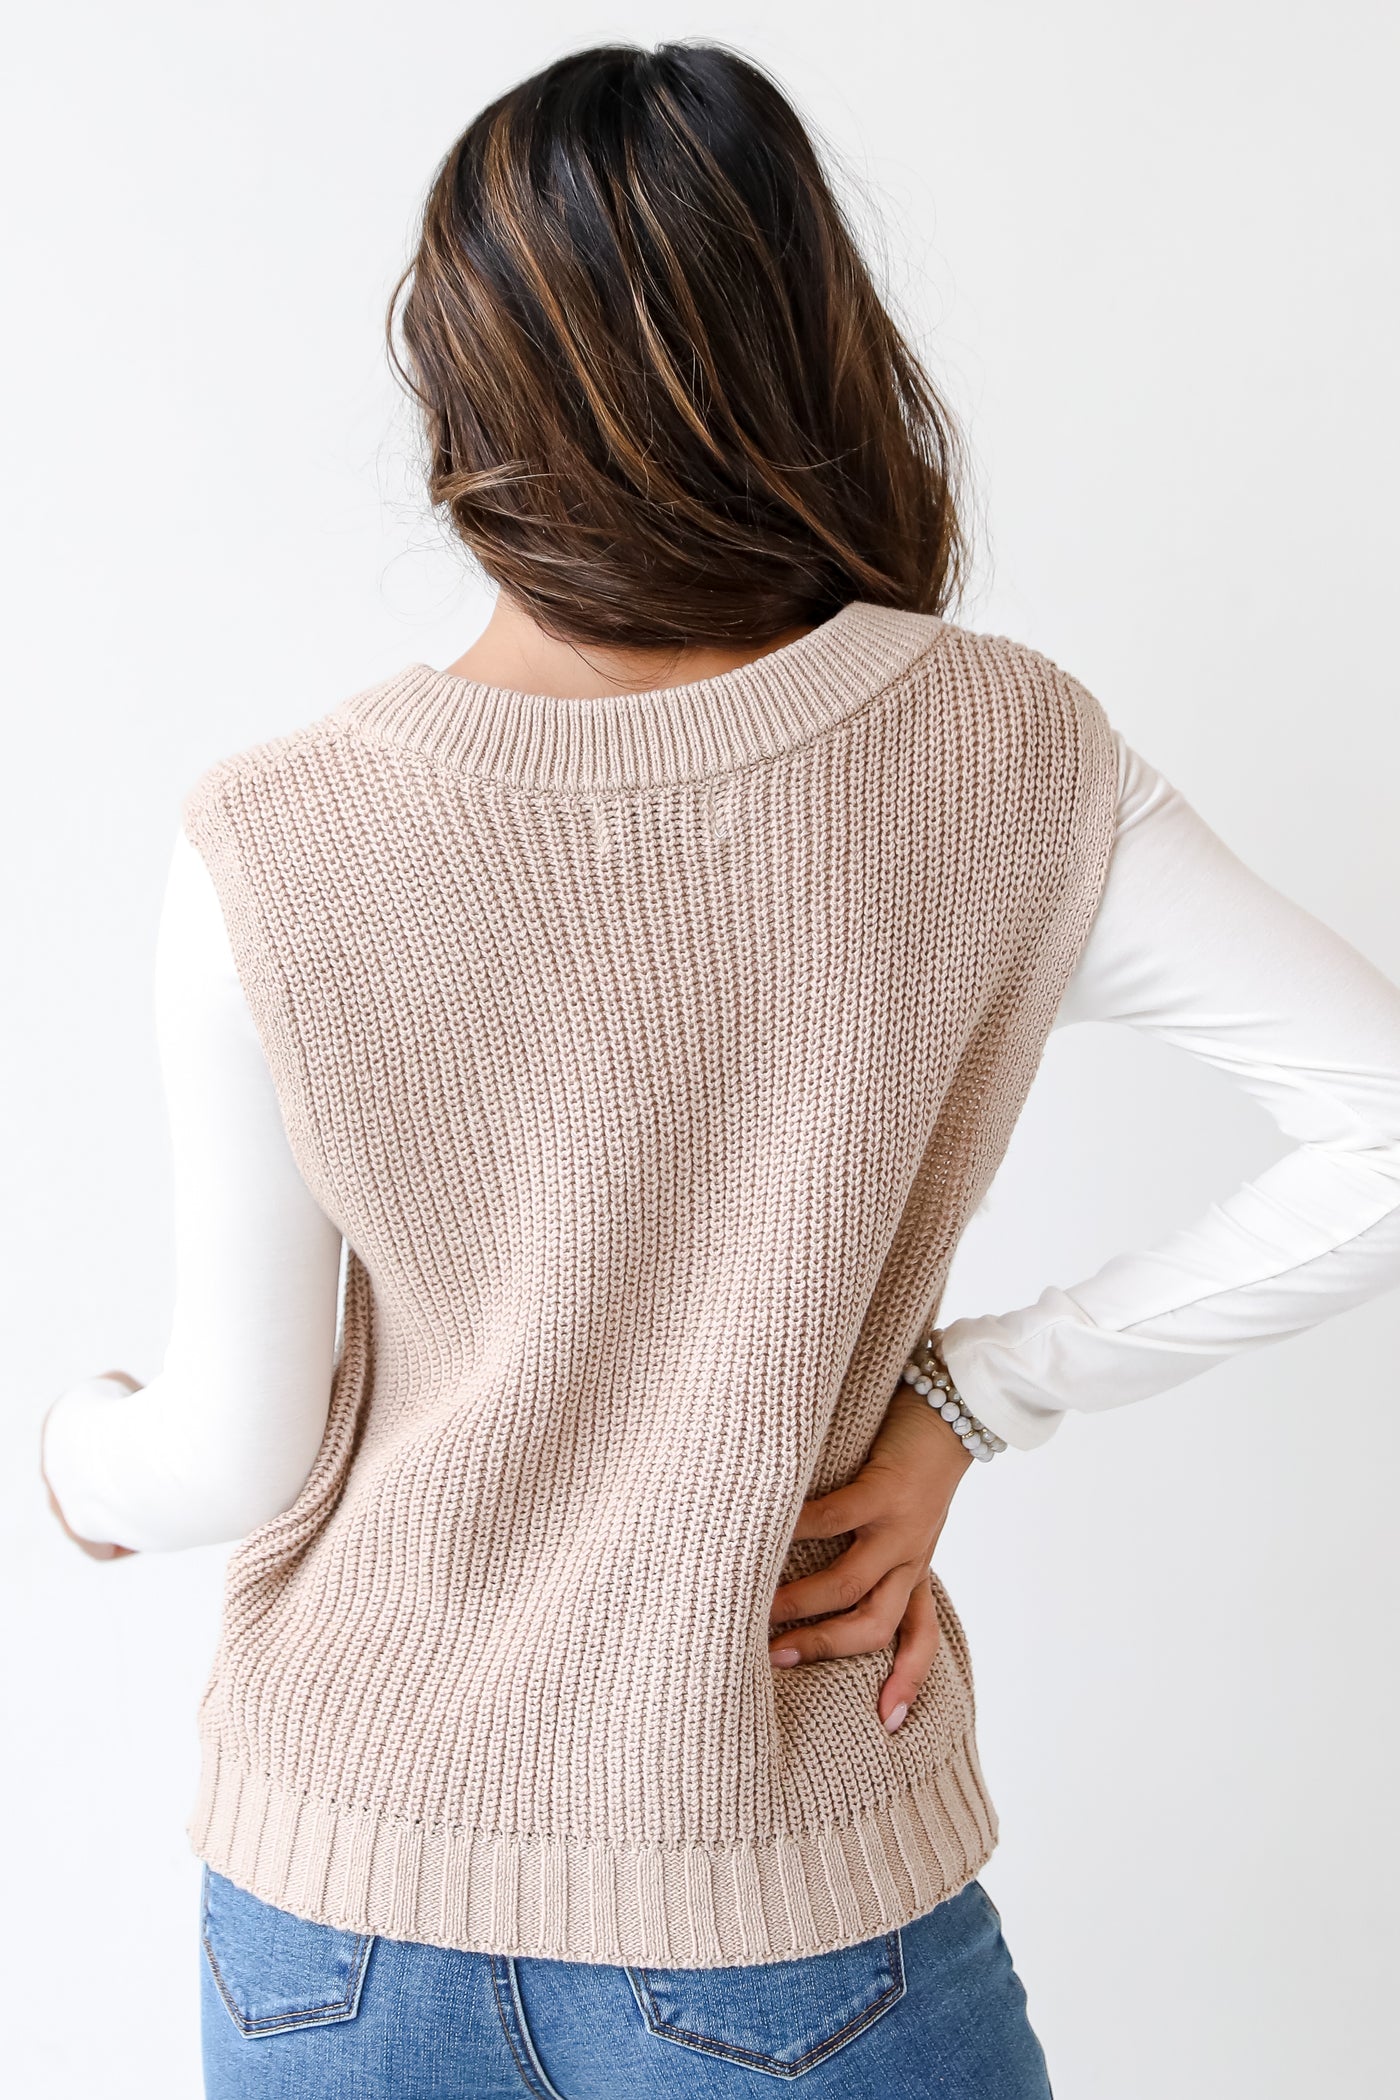 taupe Sweater Vest back view